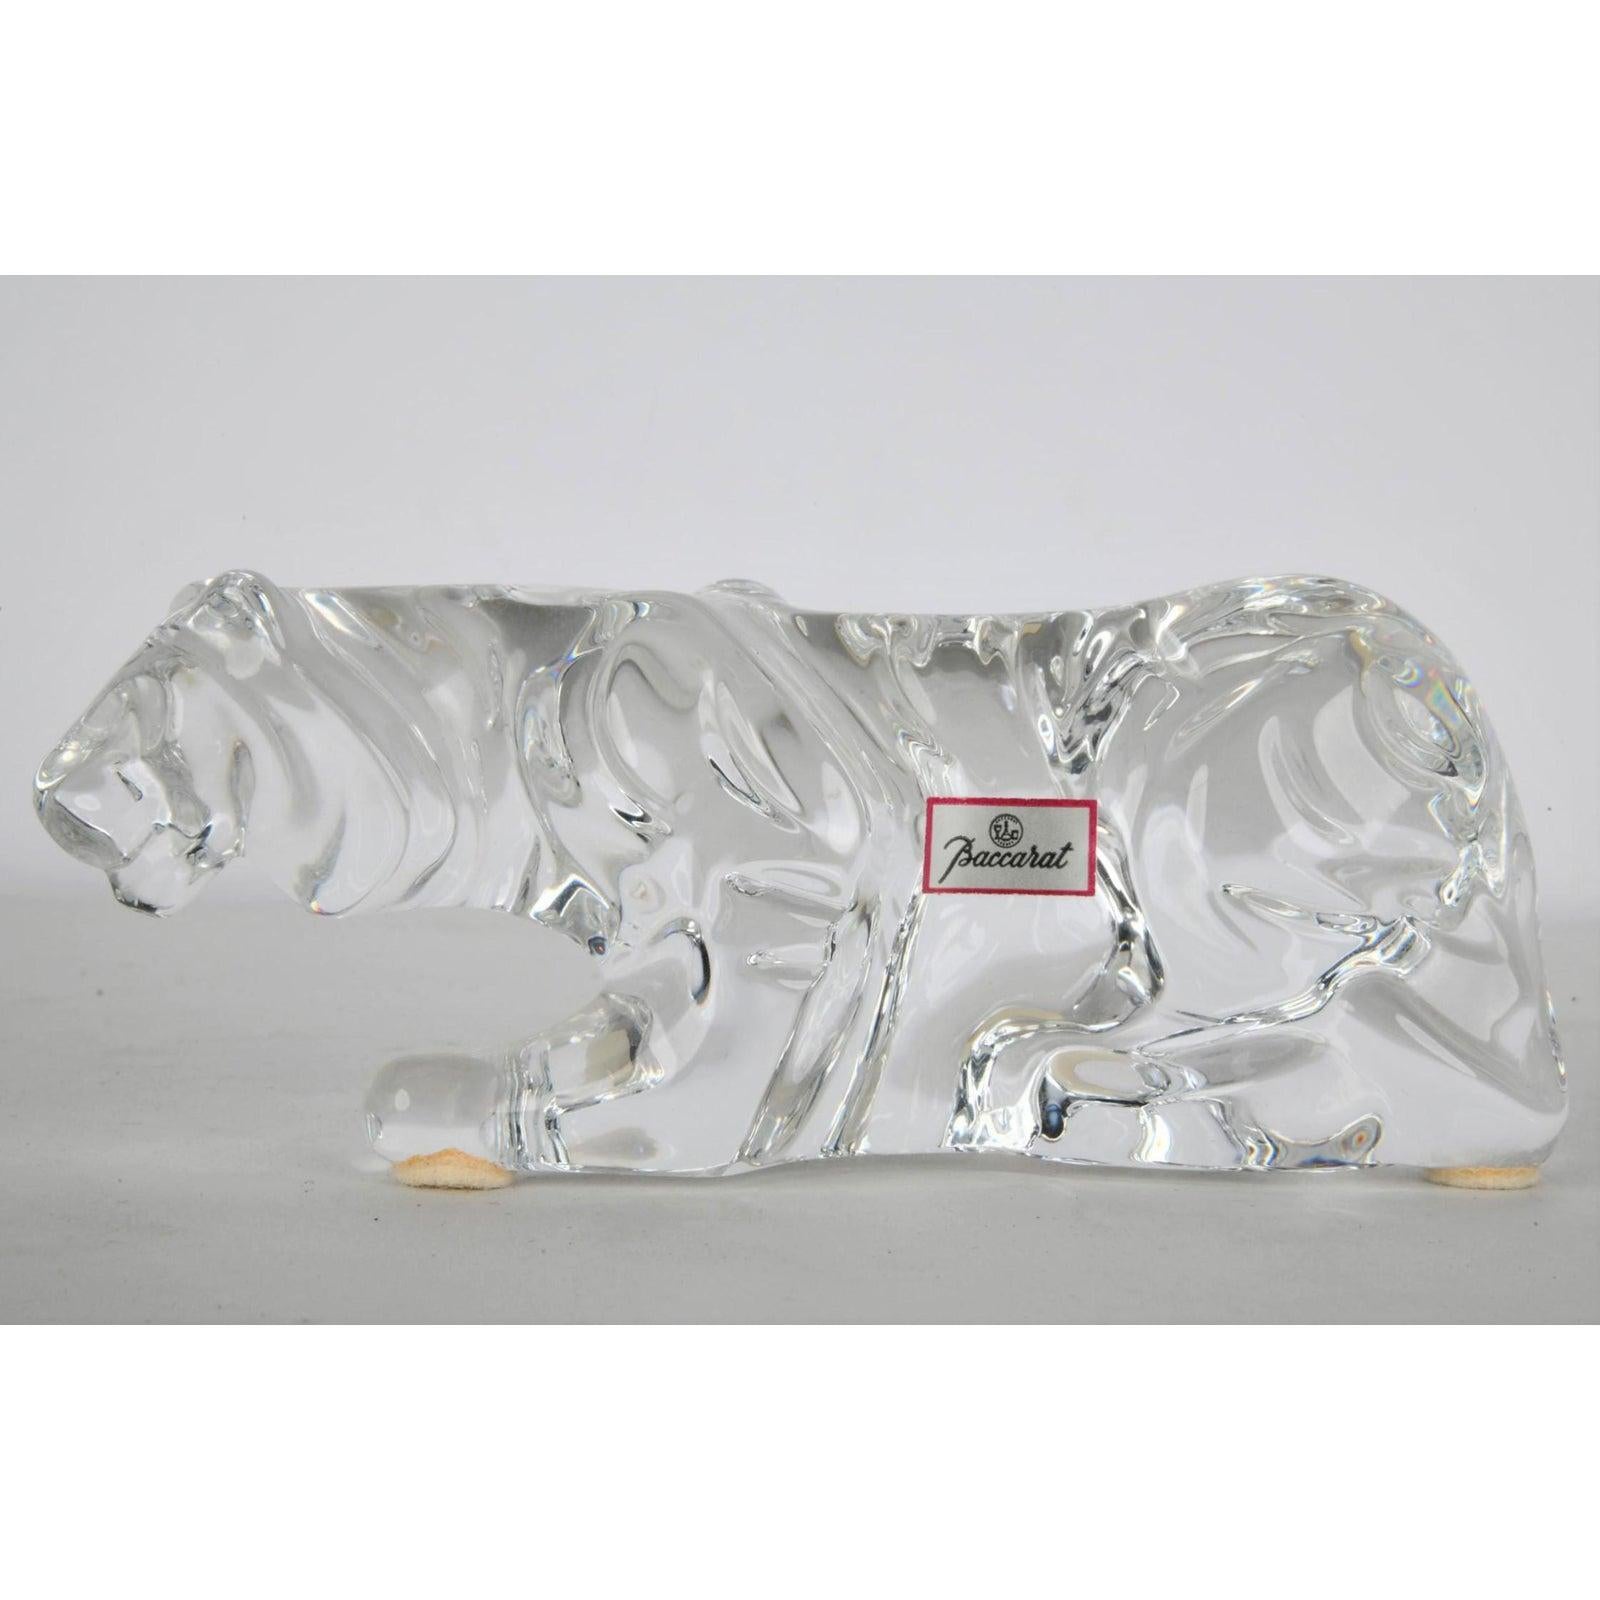 Art Deco Style signed baccarat crystal tiger panther figurine.

Additional information:
Materials: Crystal
Color: Transparent
Brand: Baccarat
Designer: Baccarat
Period: 1990s
Place of Origin: France
Styles: Art Deco
Item Type: Vintage,